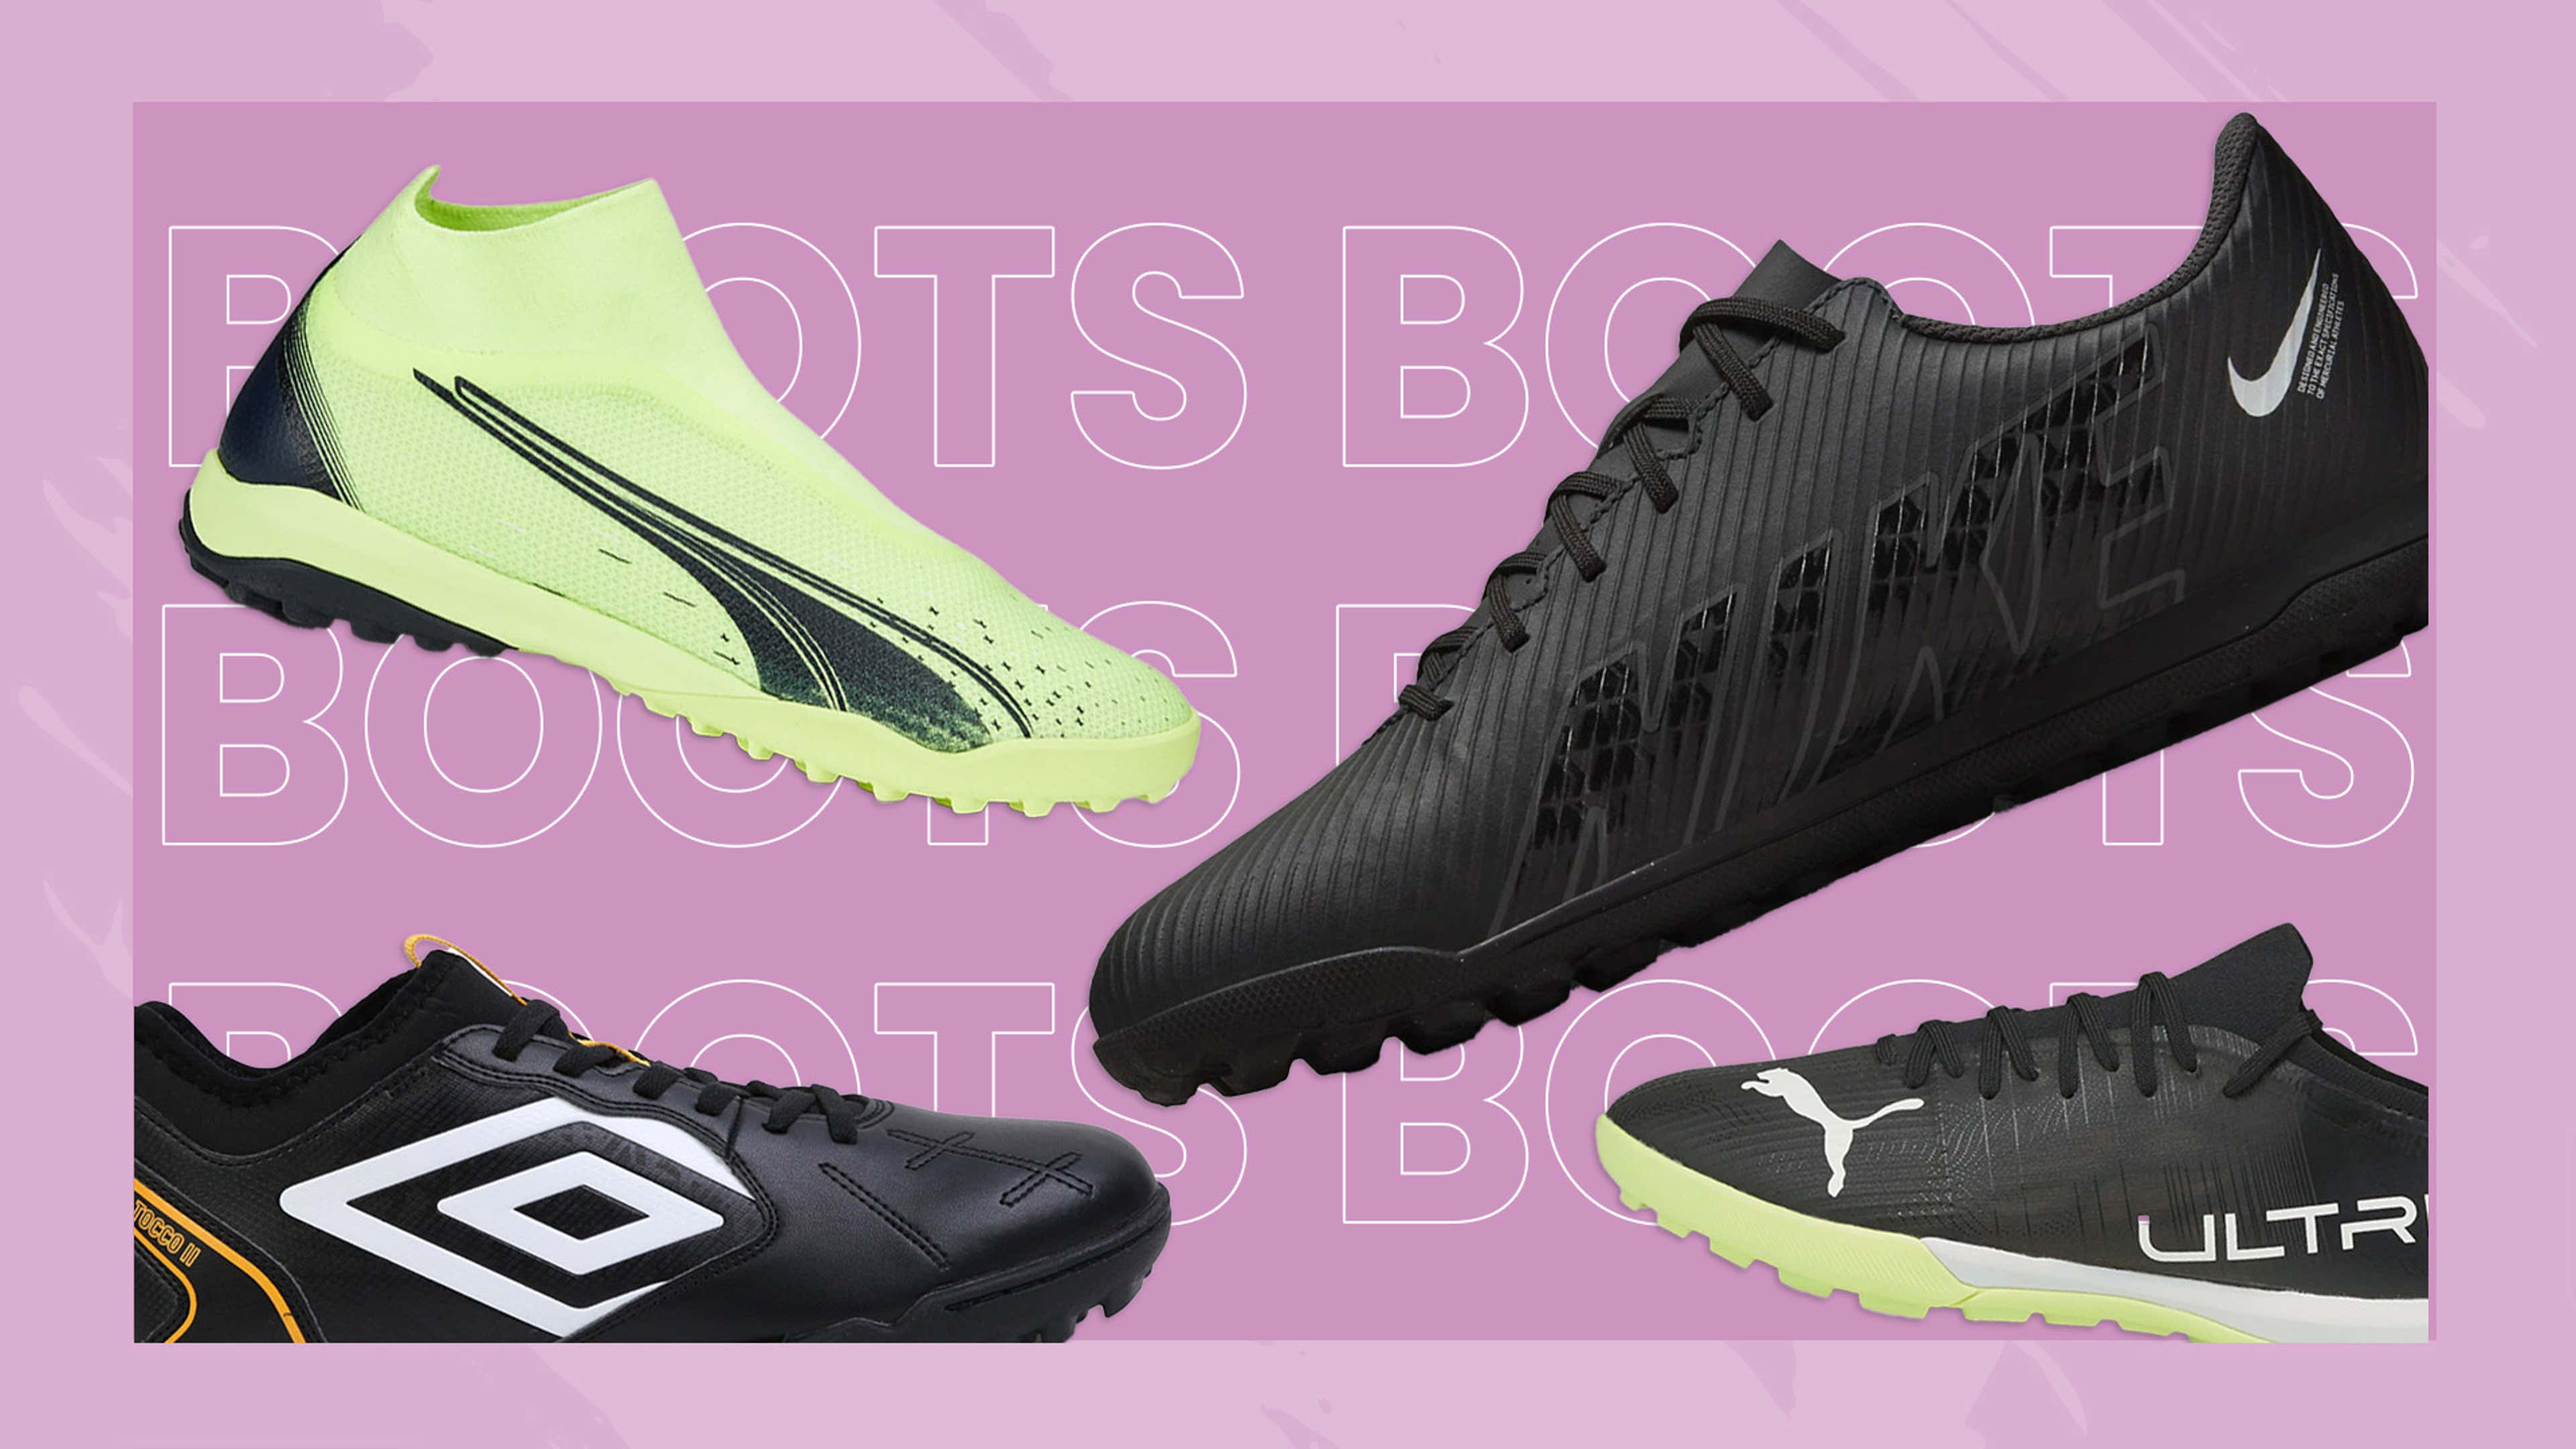 Best football boots and trainers for astroturf 2020